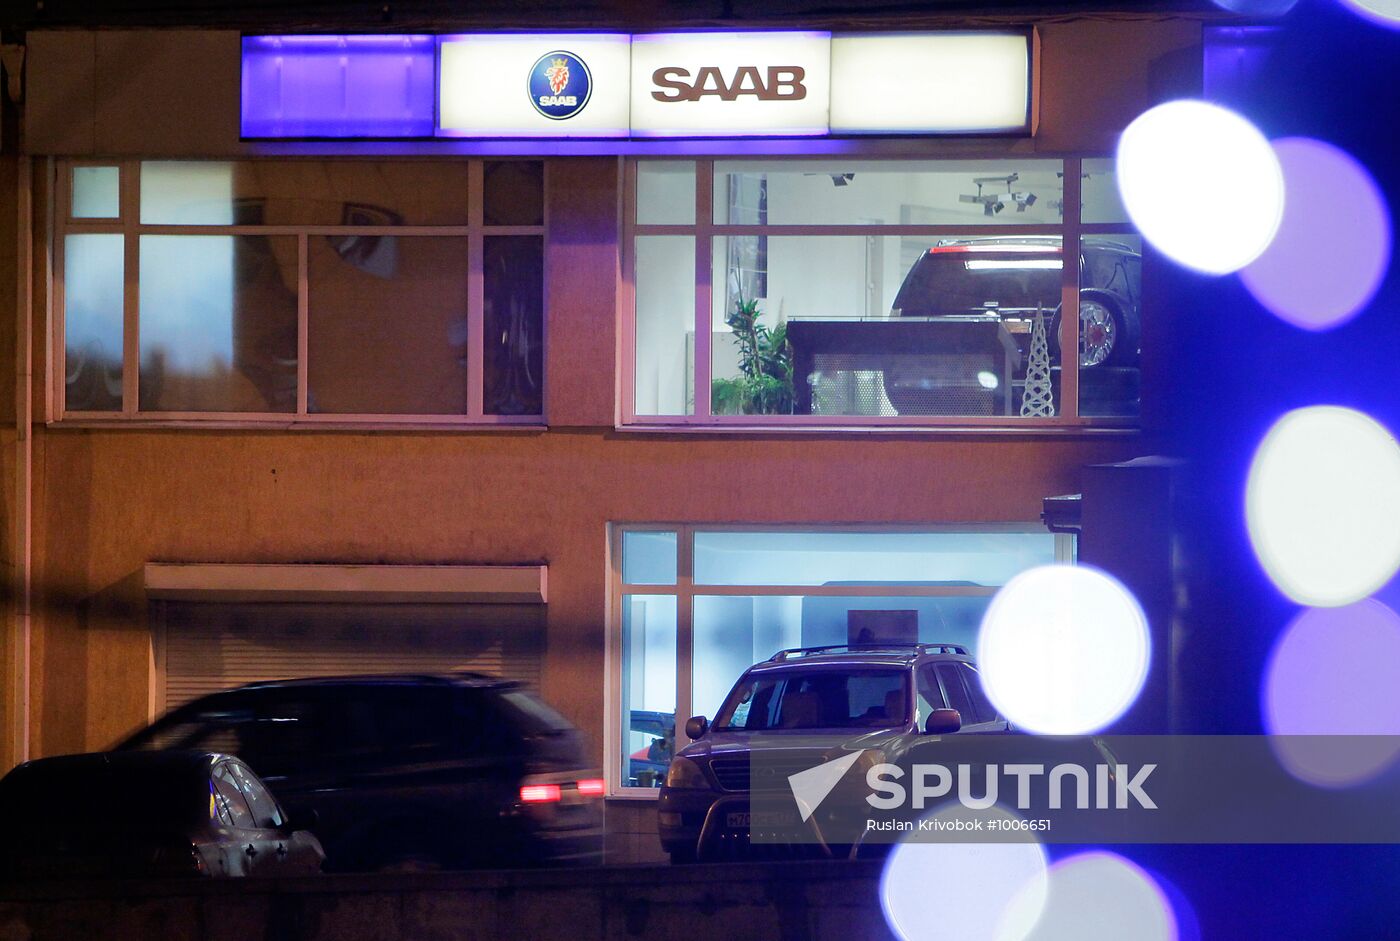 Saab files for bankruptcy